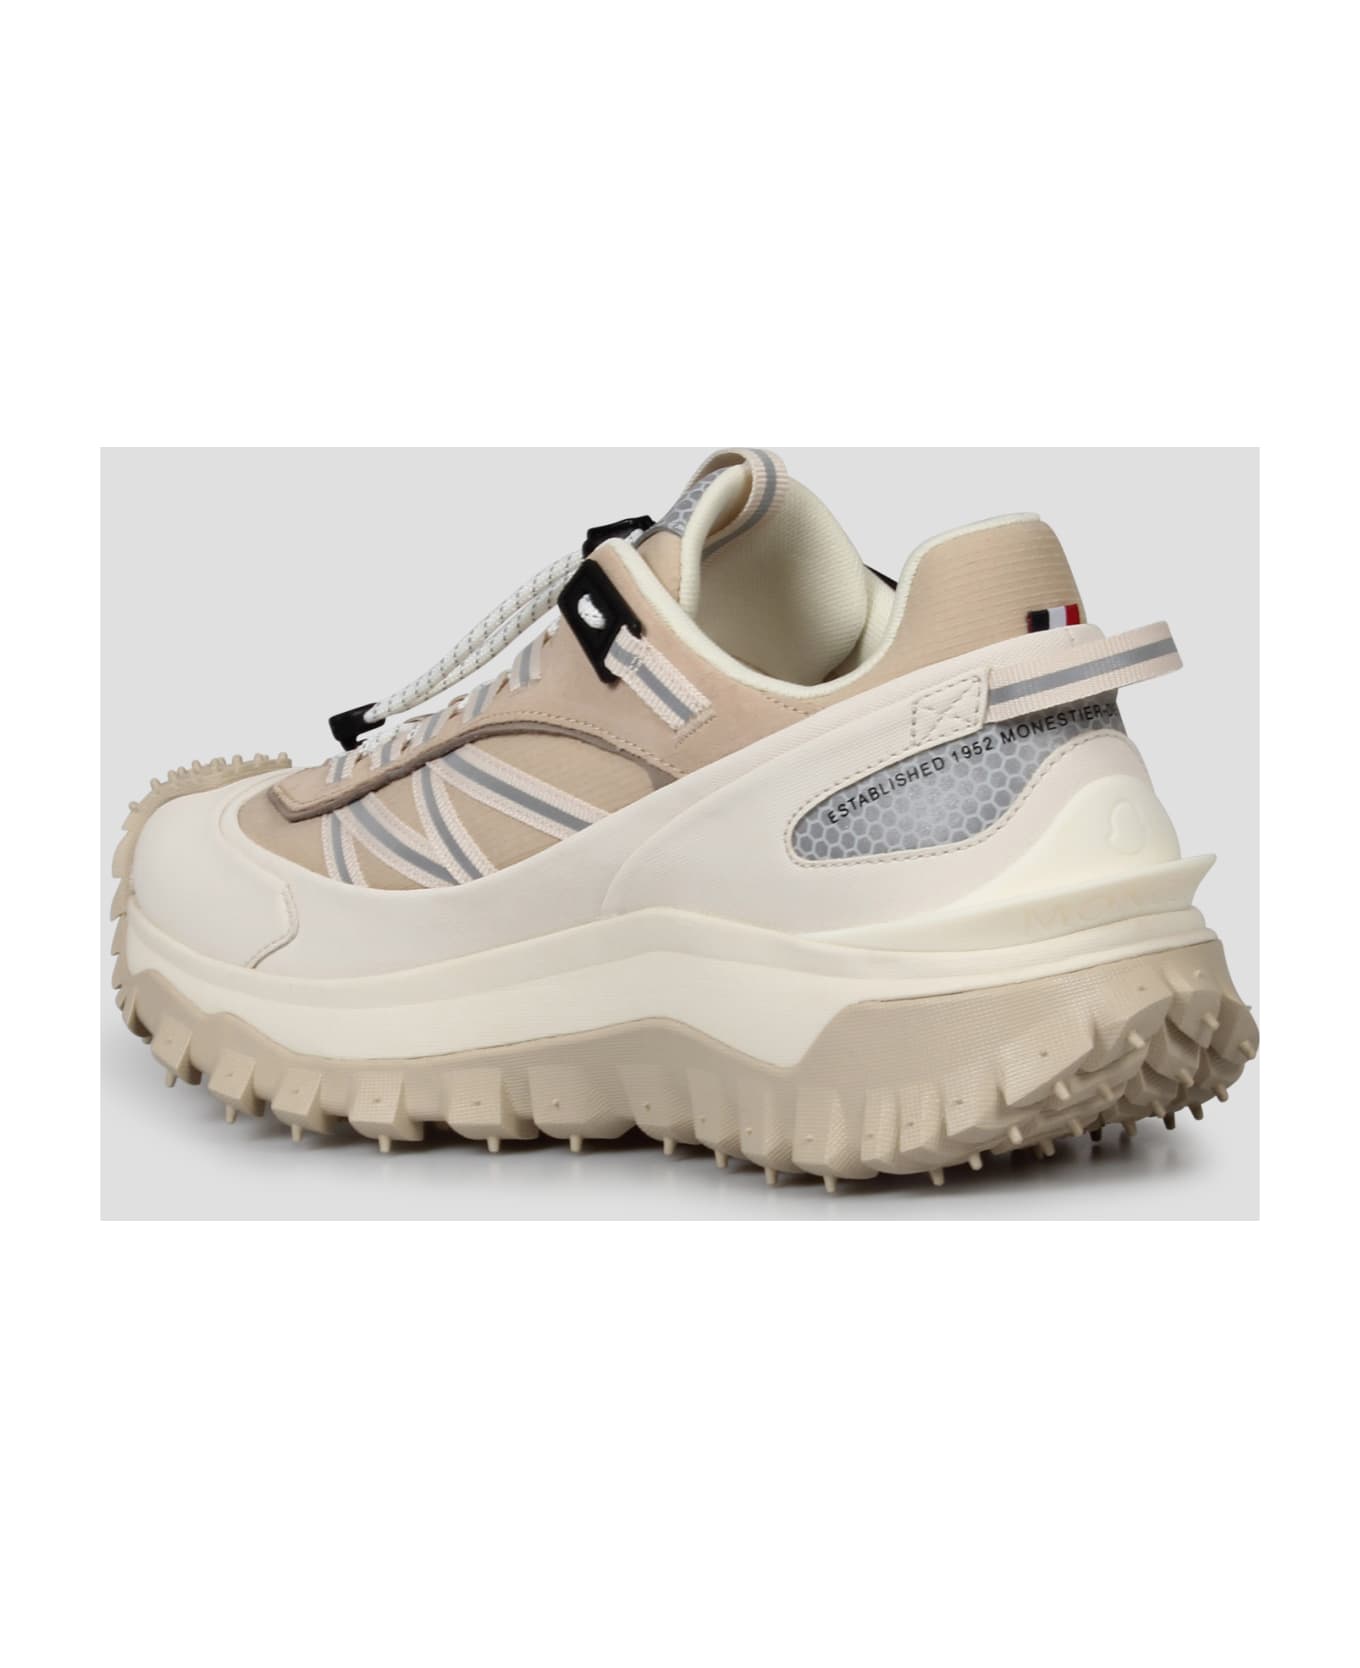 Moncler Trailgrip Sneakers - Nude & Neutrals スニーカー